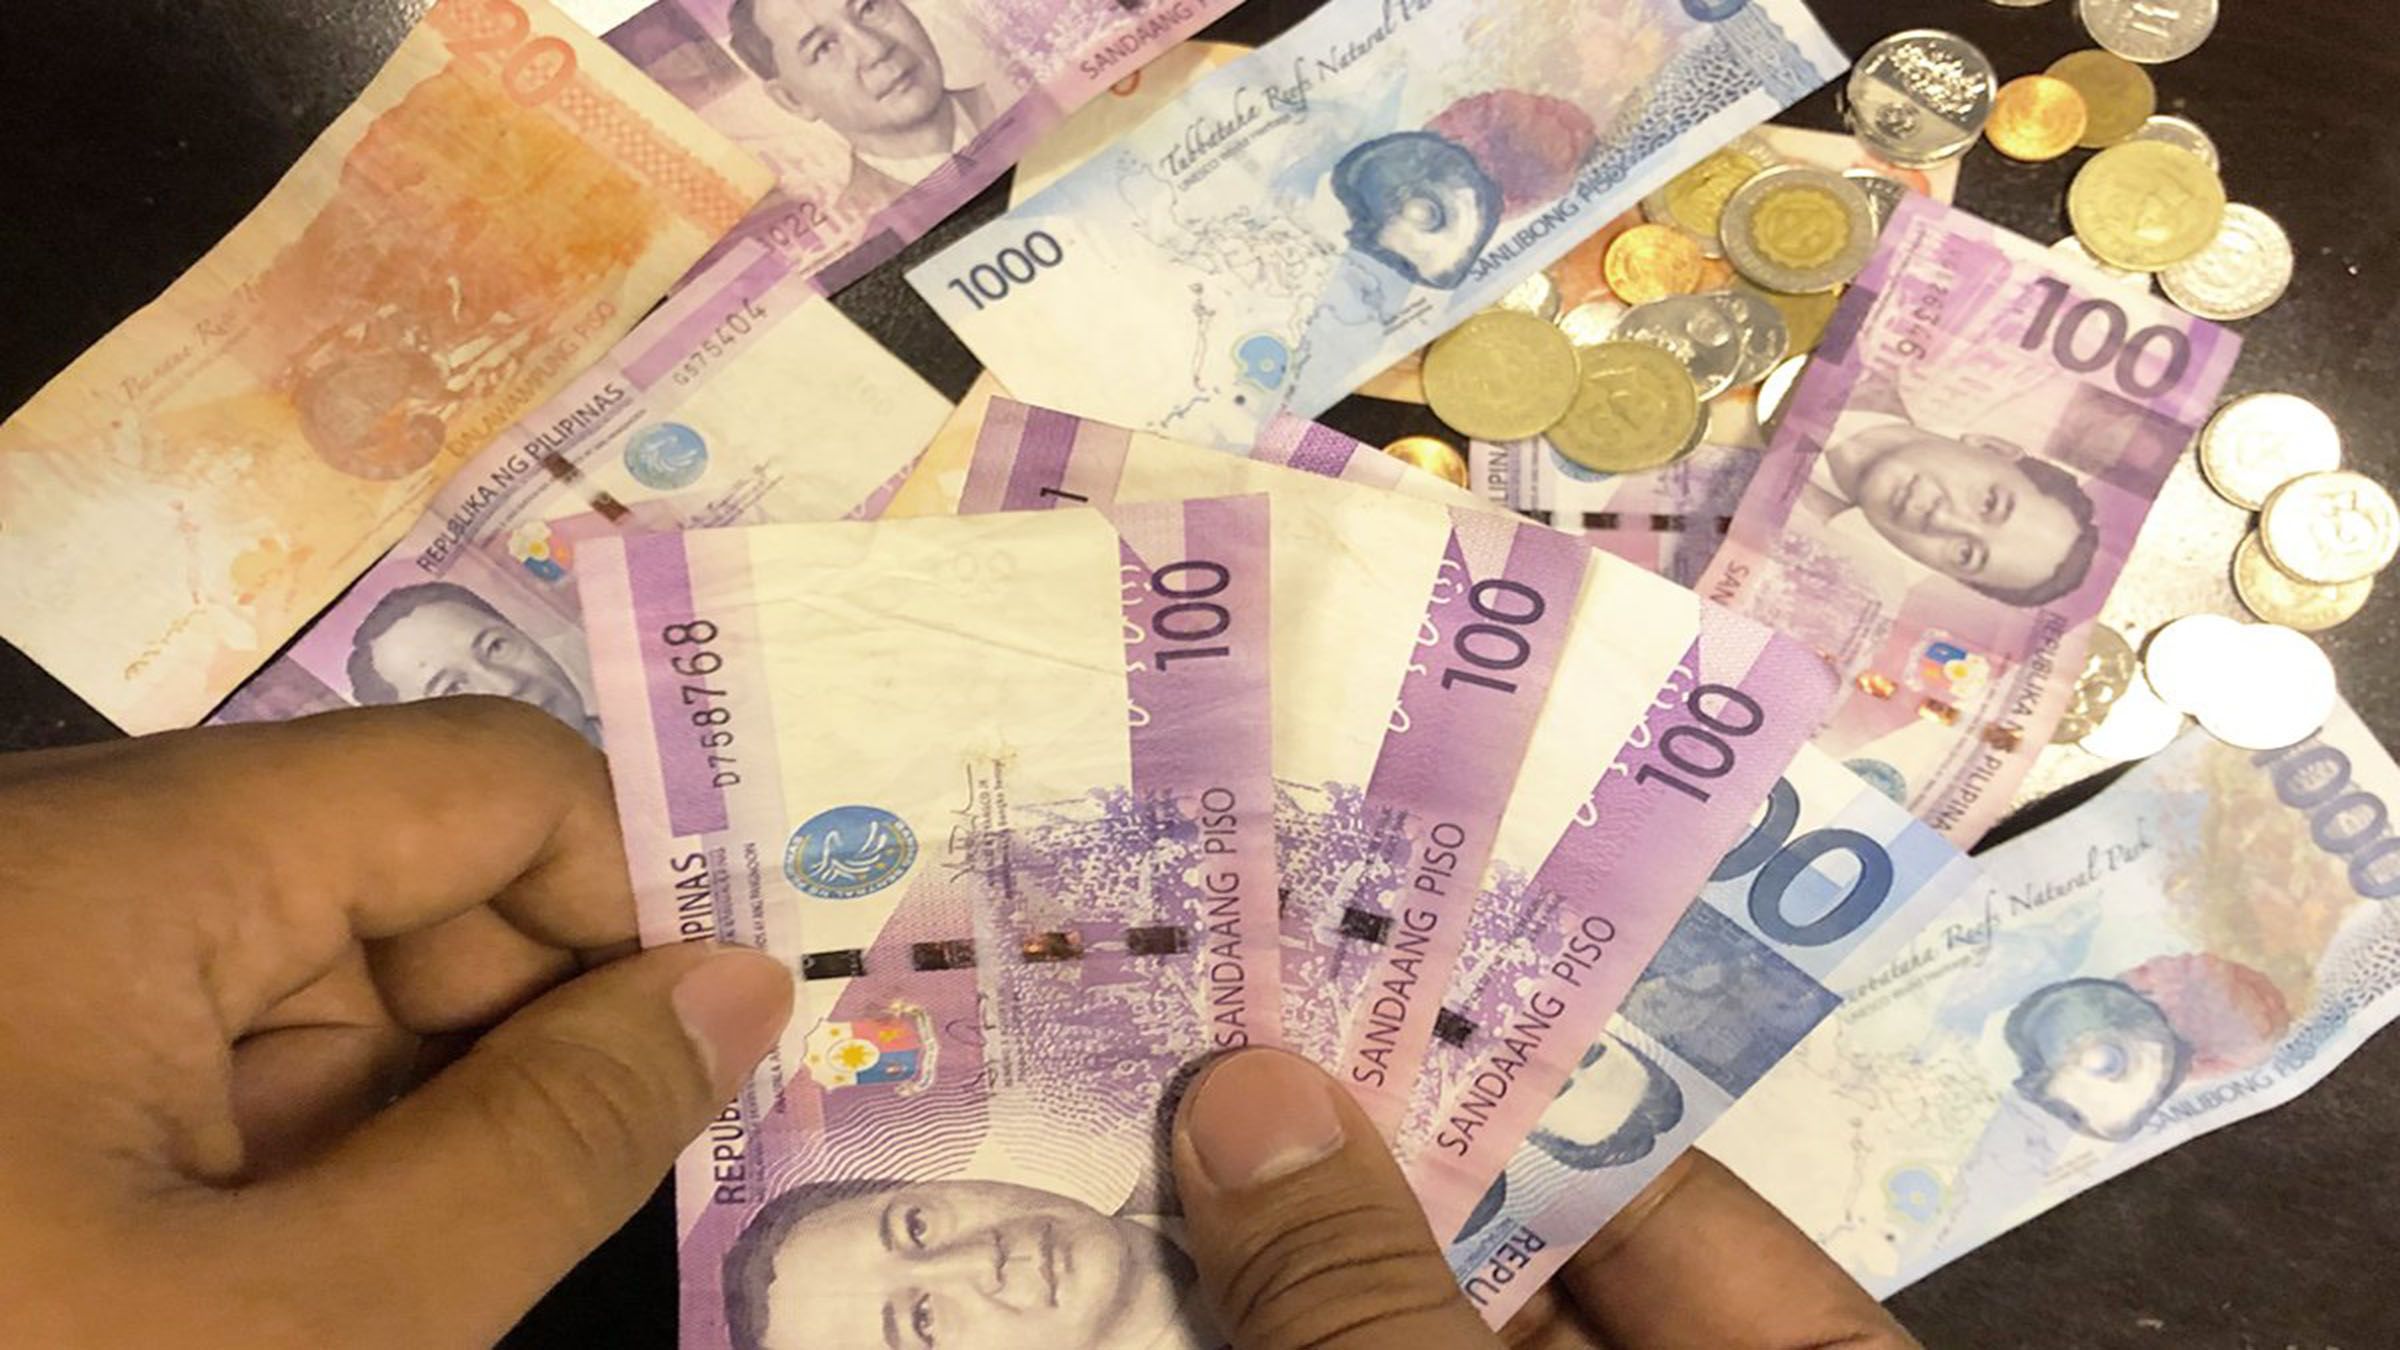 Filipinos should be financially literate